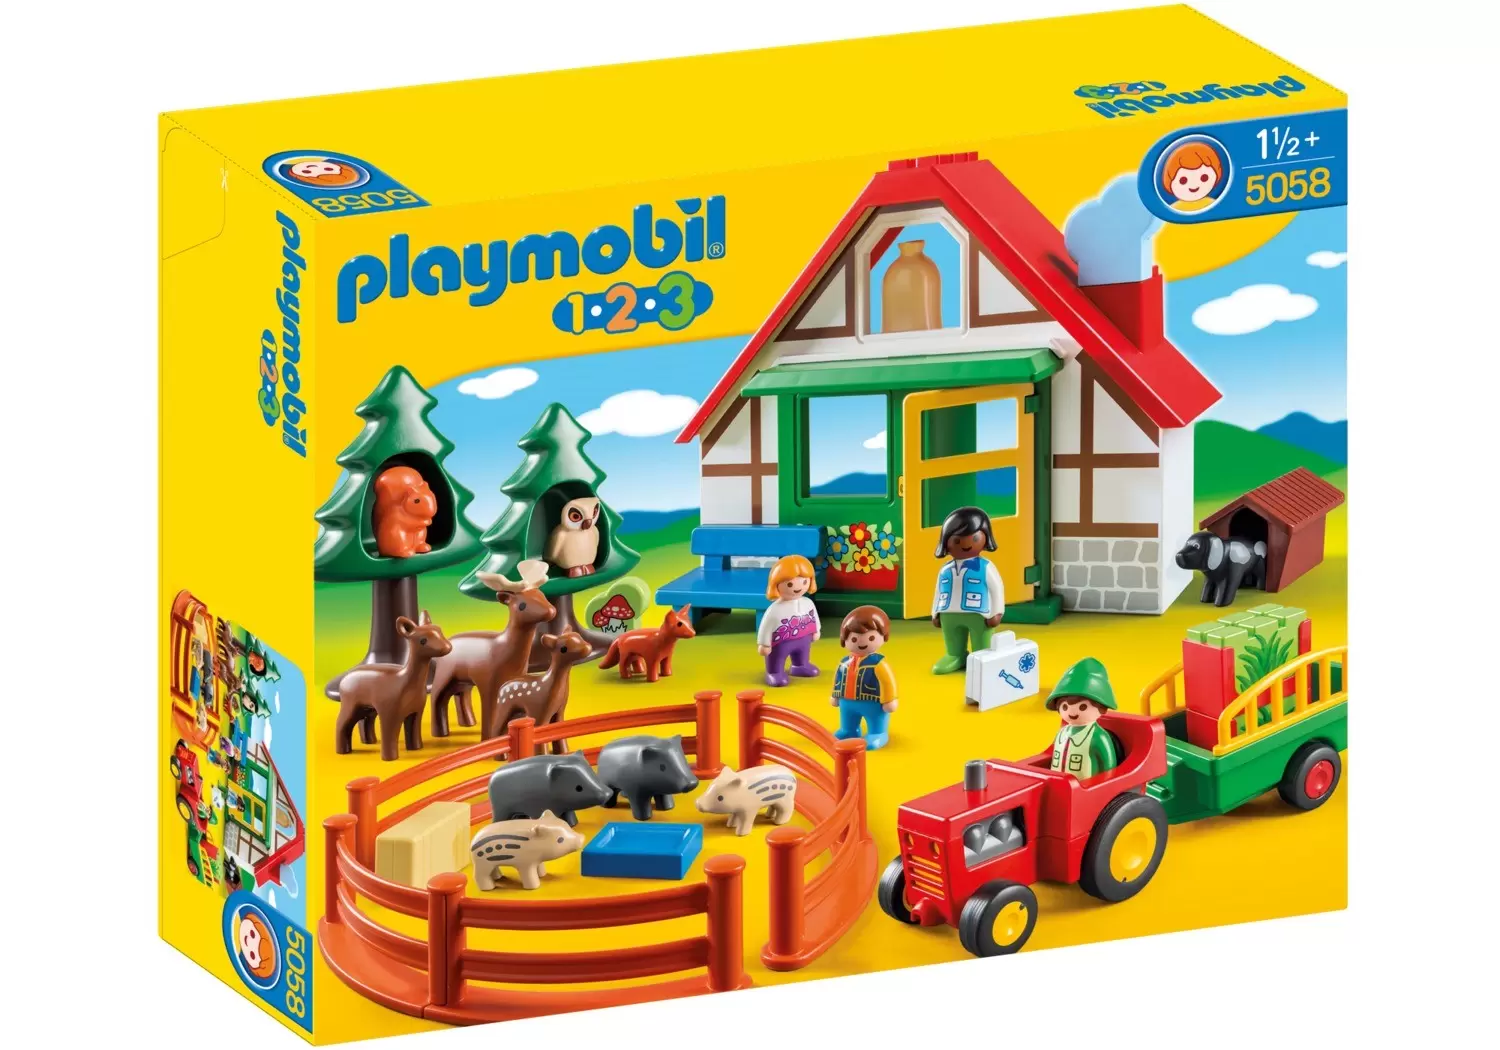 Playmobil 1.2.3 - Forest House